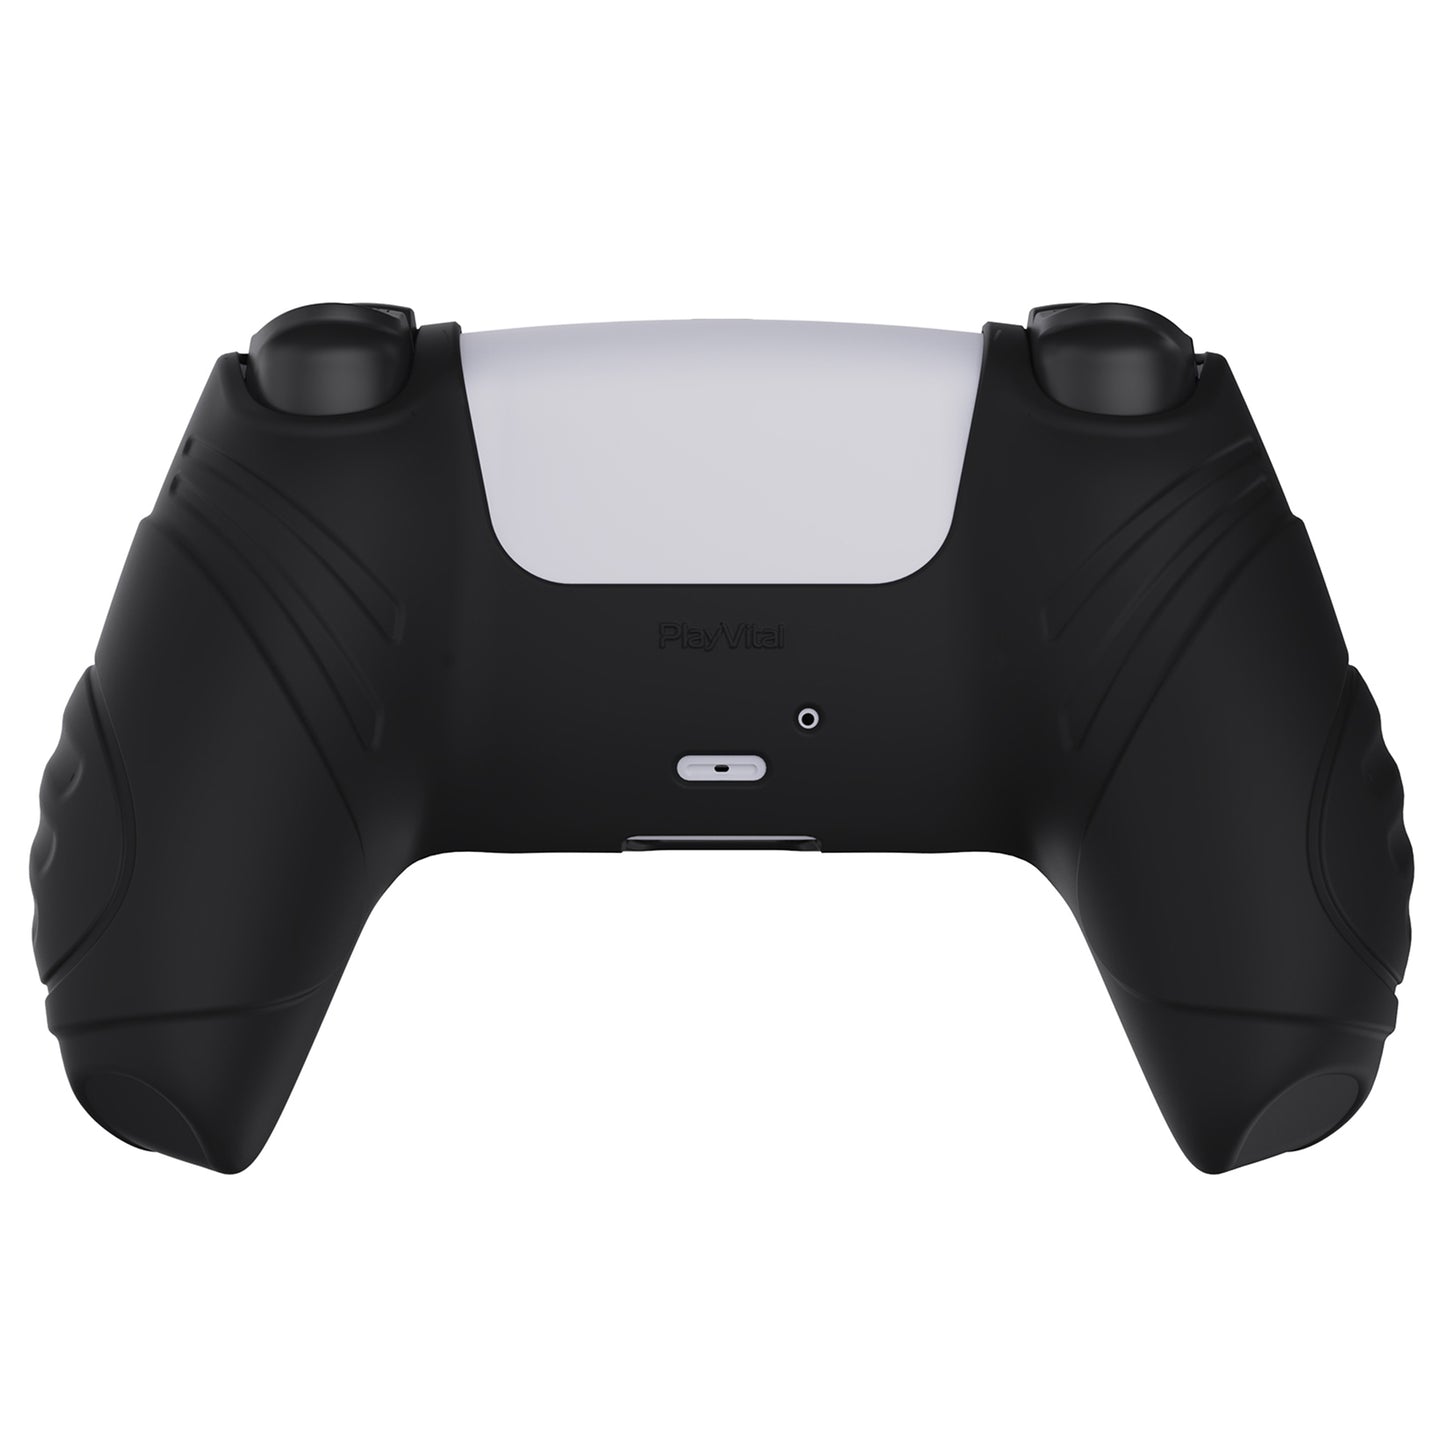 PlayVital Guardian Edition Anti-Slip Silicone Cover Skin with Thumb Grip Caps for PS5 Wireless Controller - Black - YHPF001 PlayVital